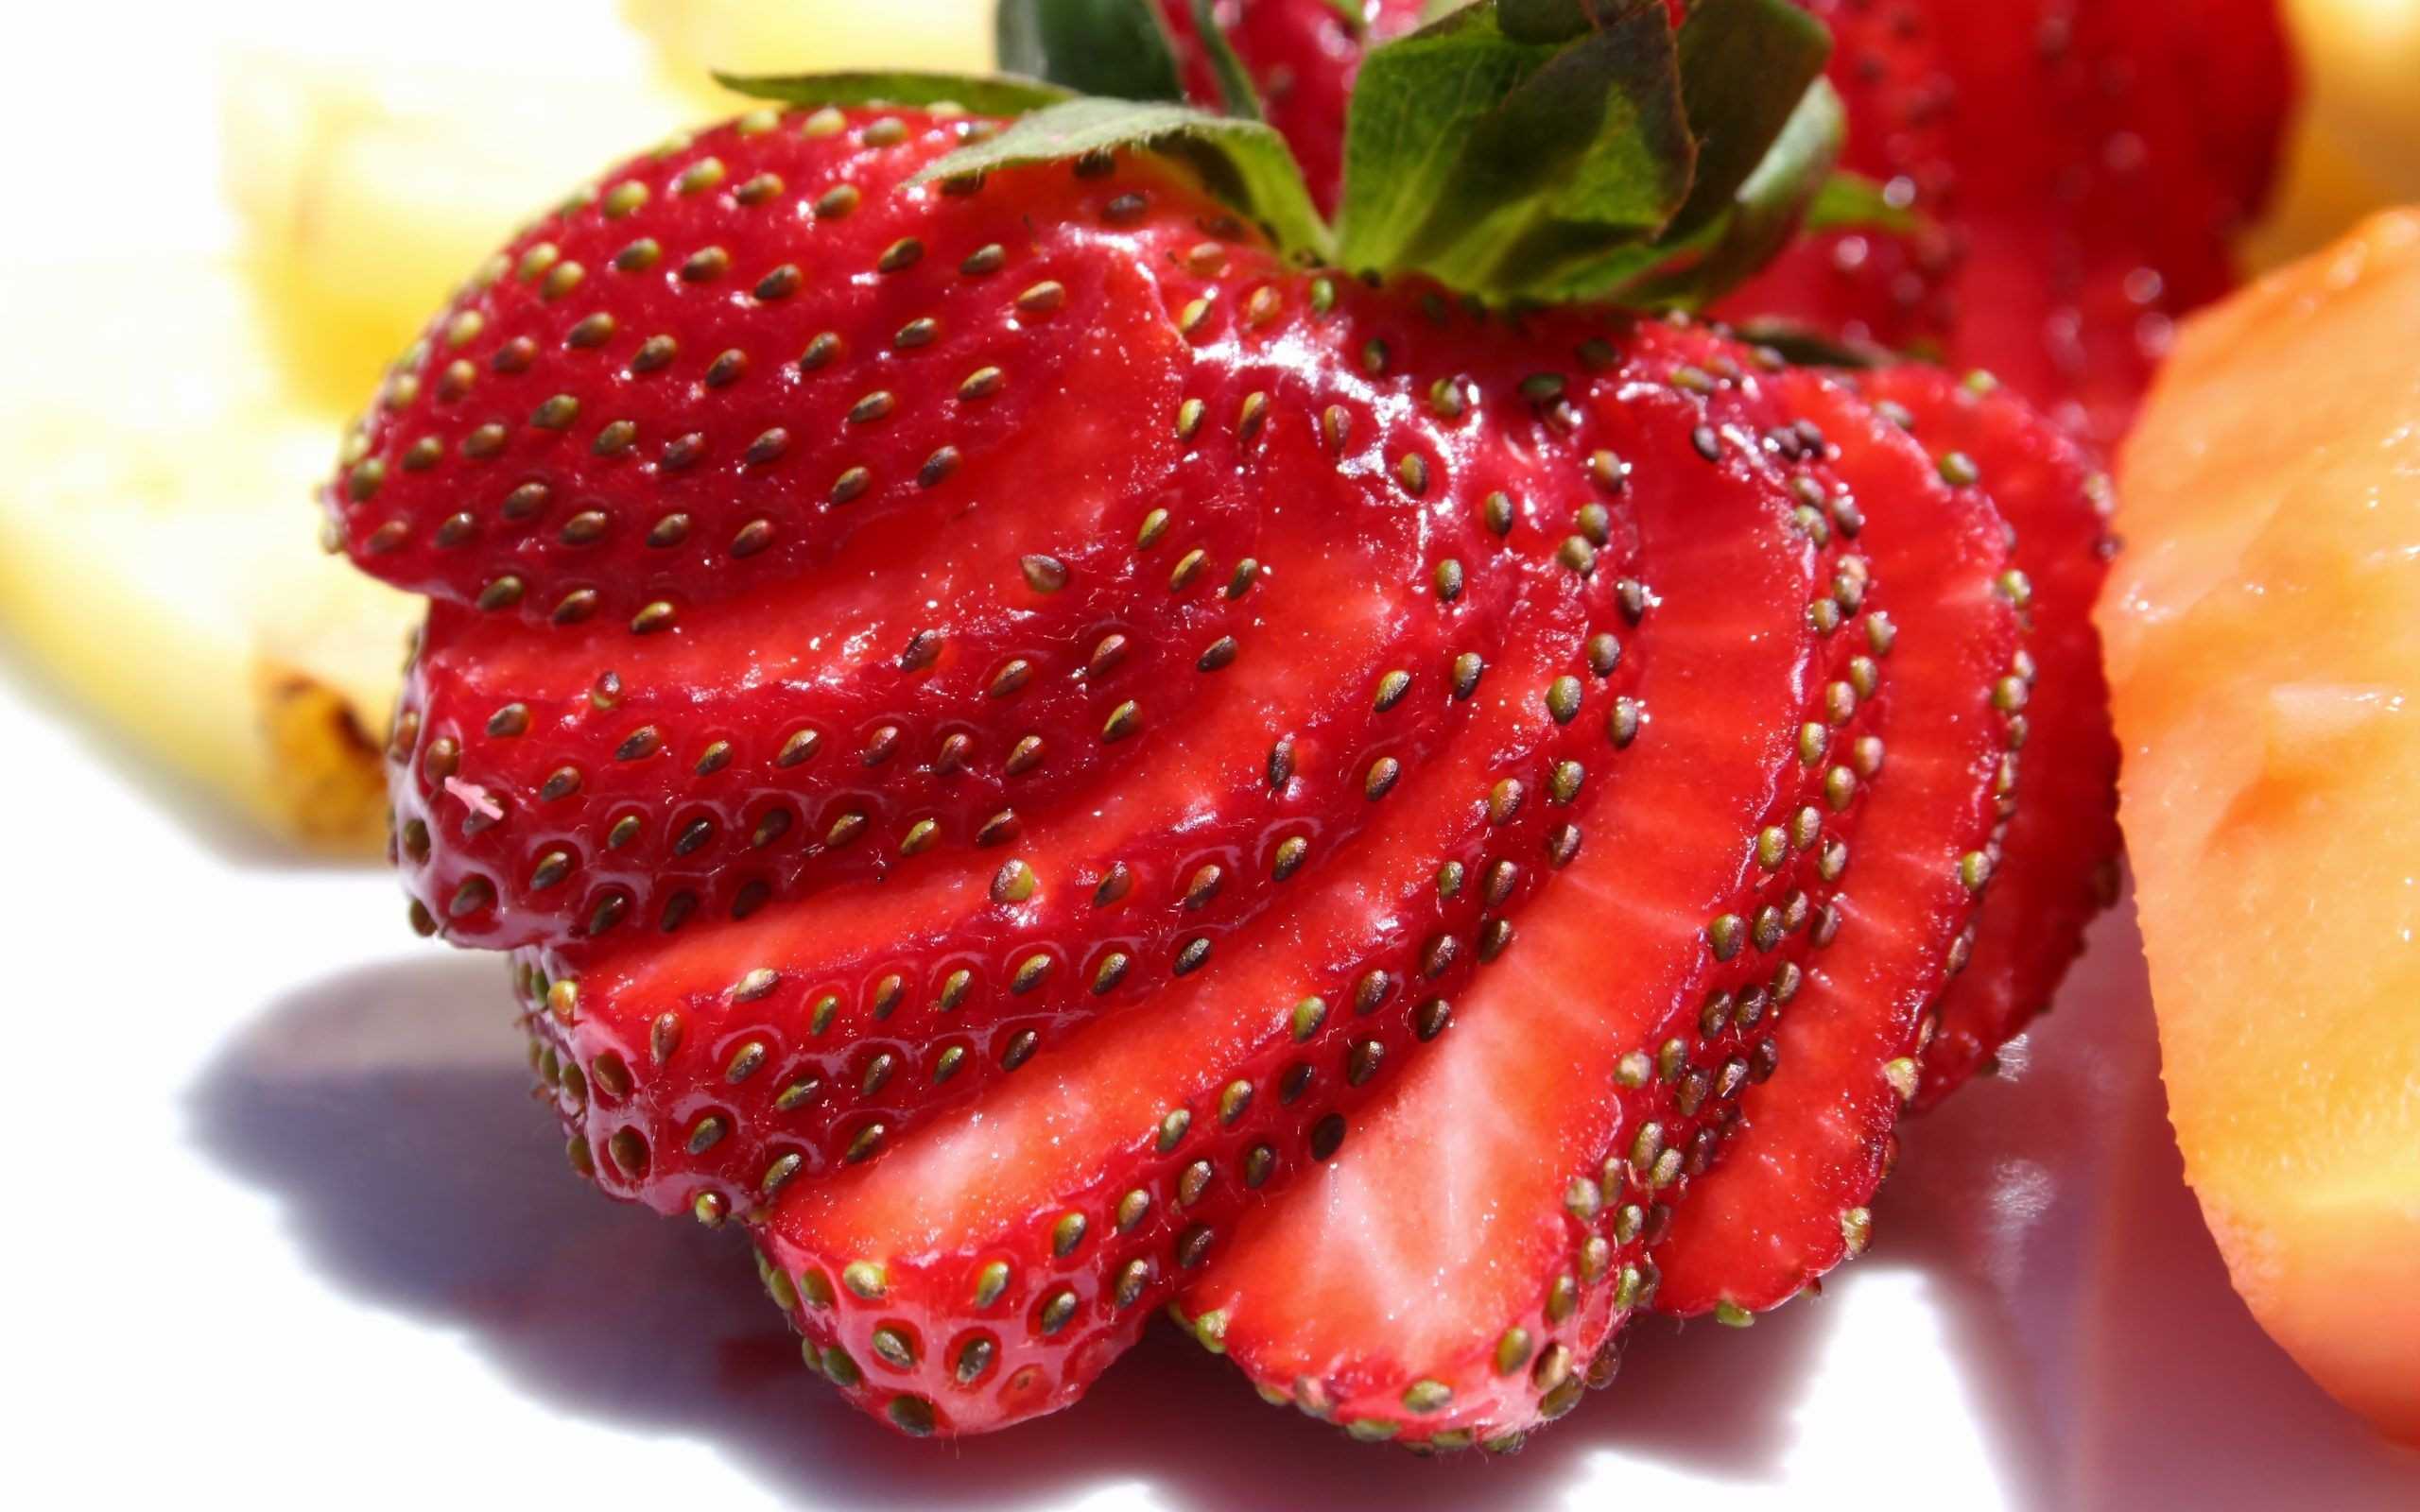 Strawberry Wallpaper HD Best Collection Of Strawberries